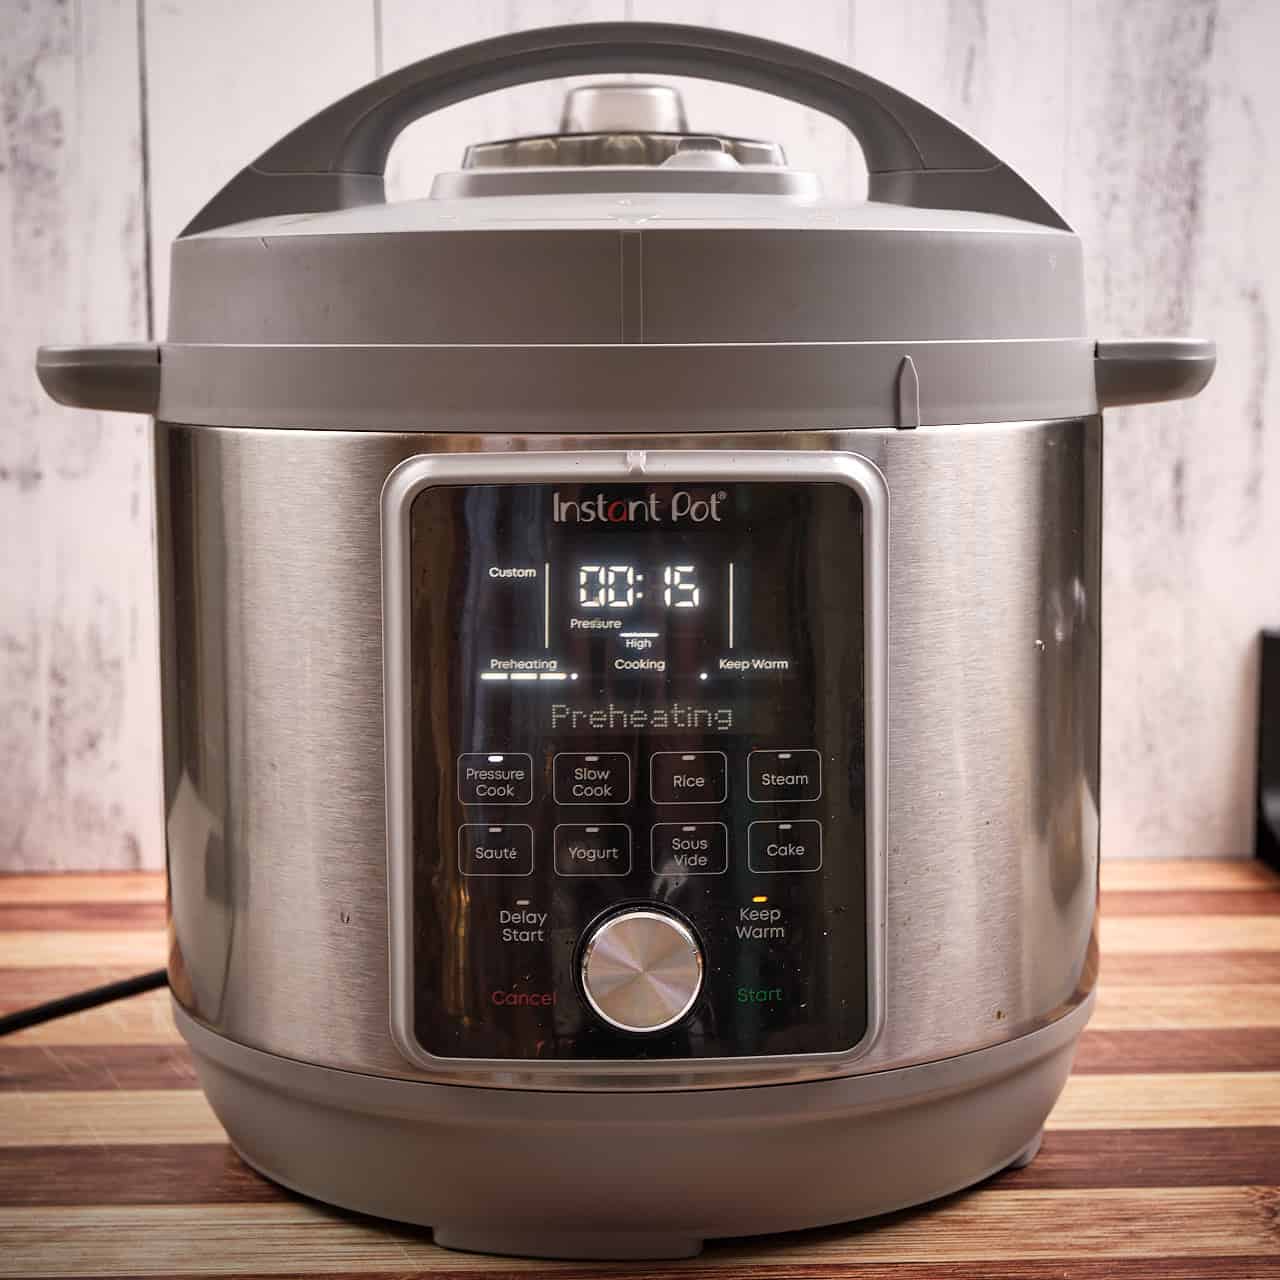 An instant pot set to cook for 15 minutes at high pressure